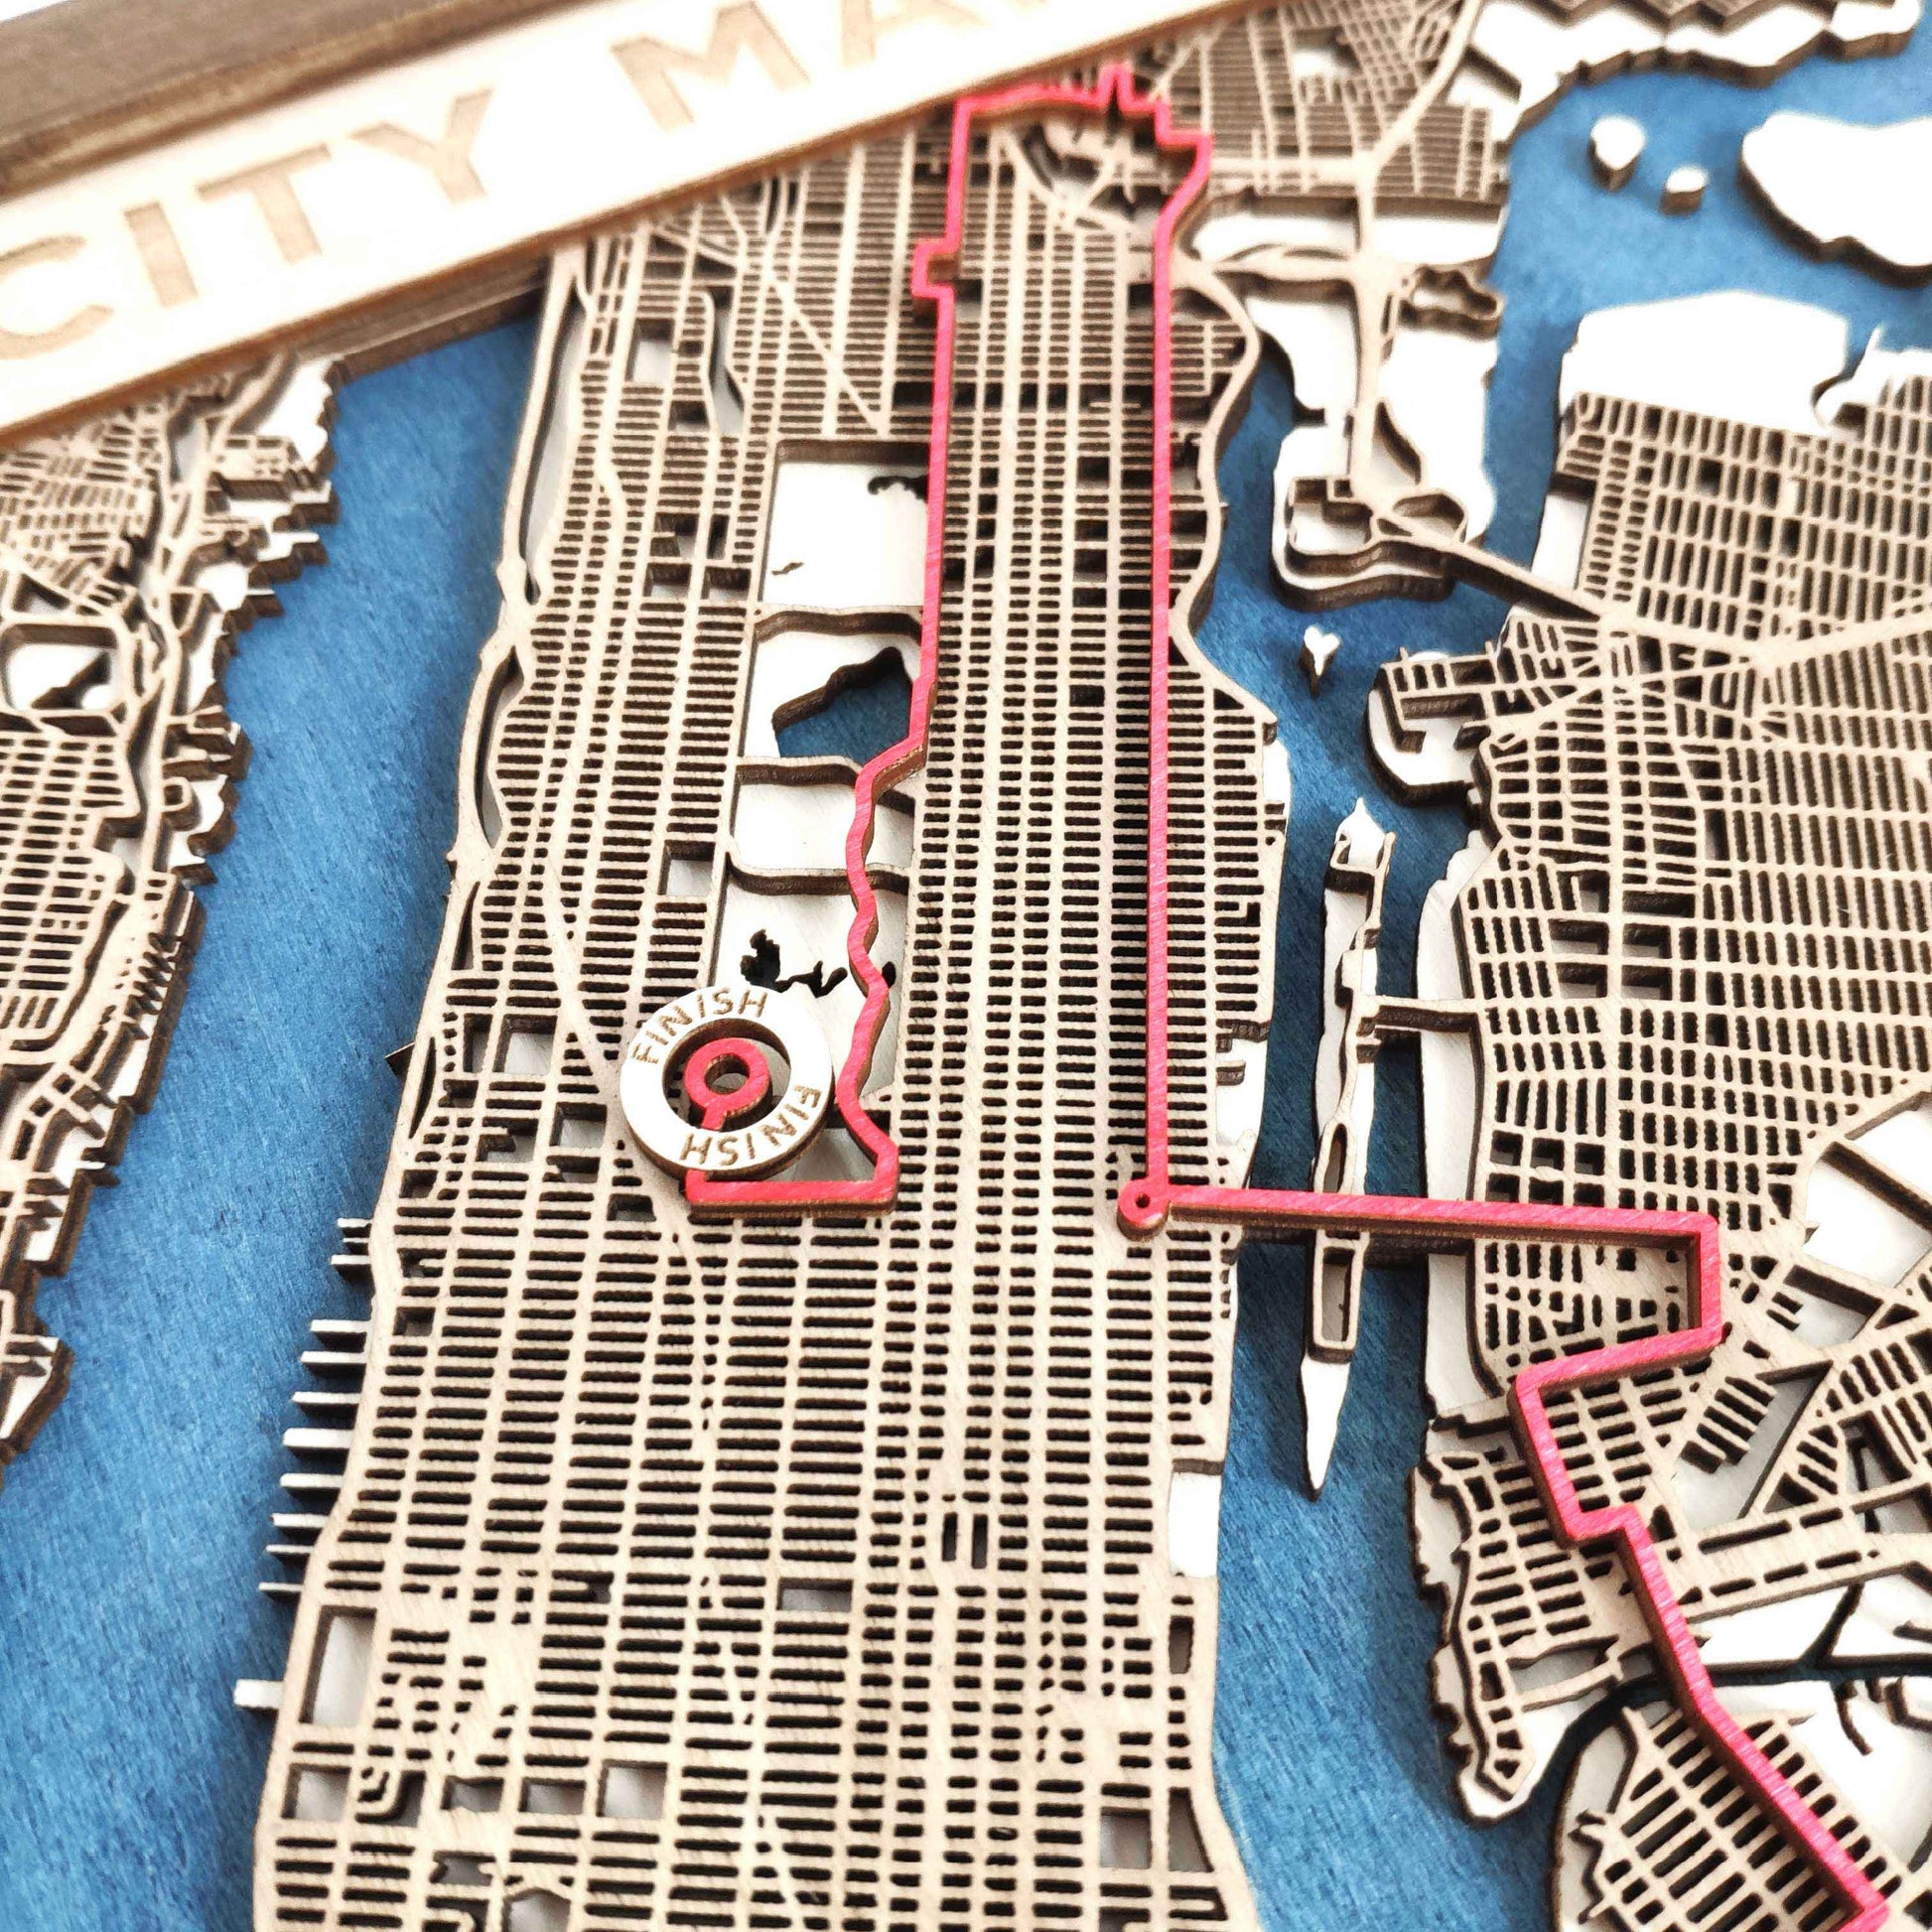 New York City Marathon Commemorative Wooden Route Map – Collector's Item by CityWood - Custom Wood Map Art - Unique Laser Cut Engraved - Anniversary Gift